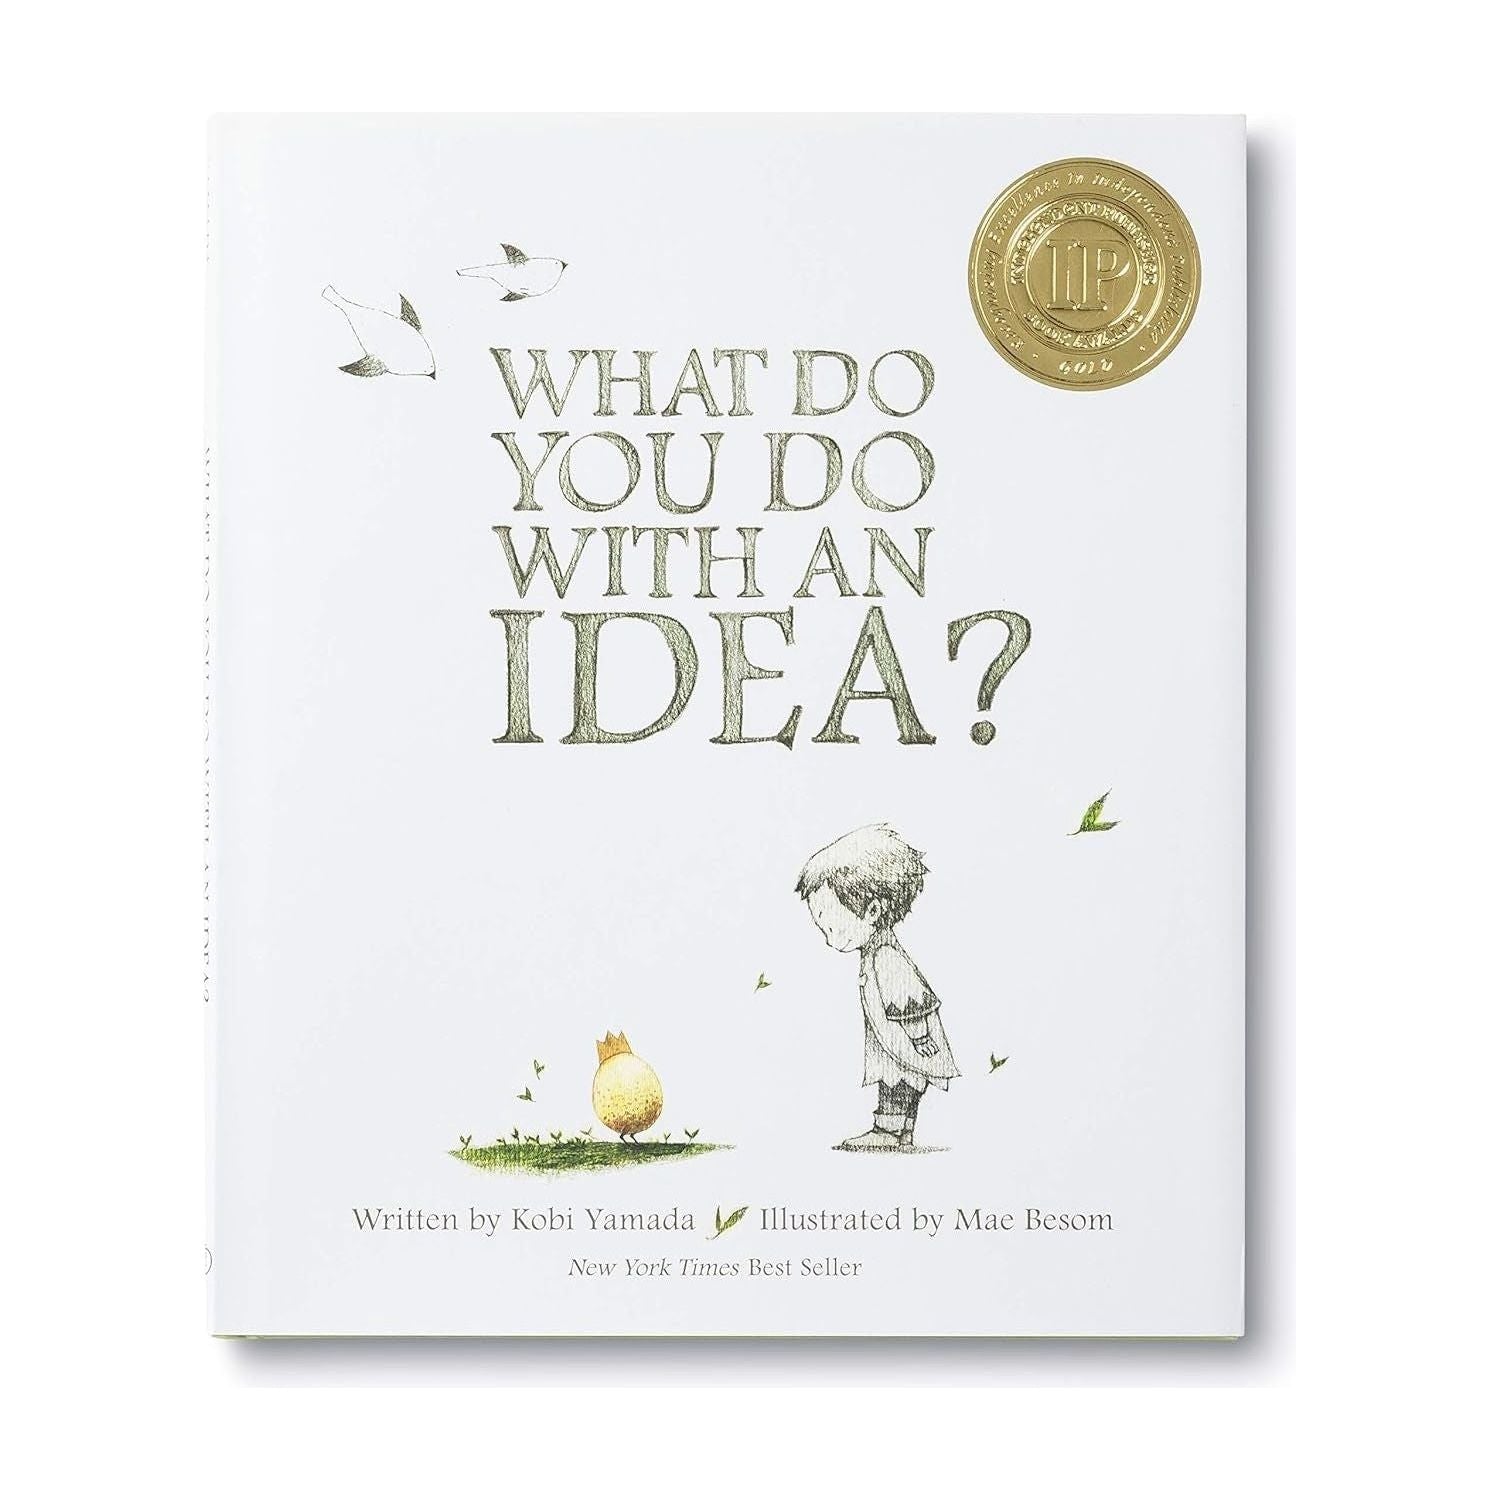 What Do You Do with an Idea? — New York Times Best Seller